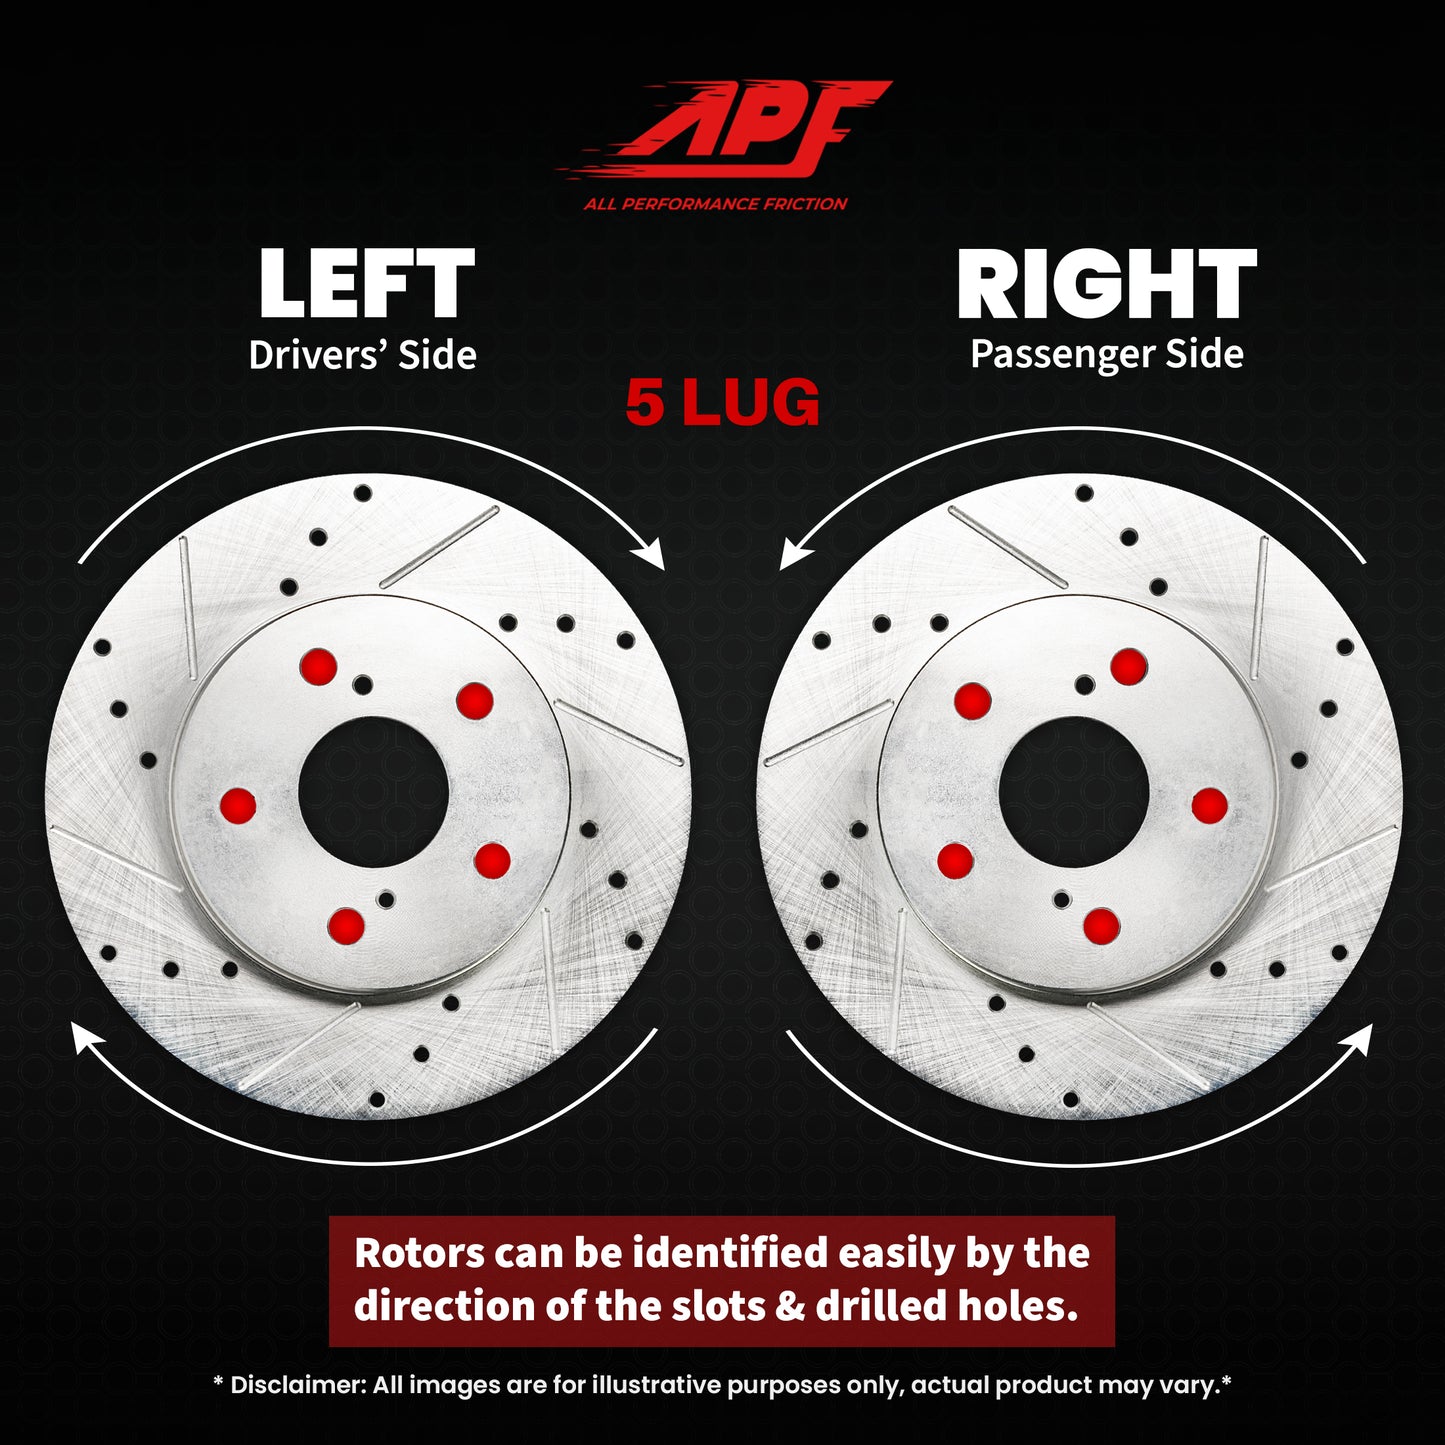 APF All Performance Friction Rear Rotors compatible with Mitsubishi Lancer 2008-2016 Zinc Drilled Slotted Rotors | $118.4